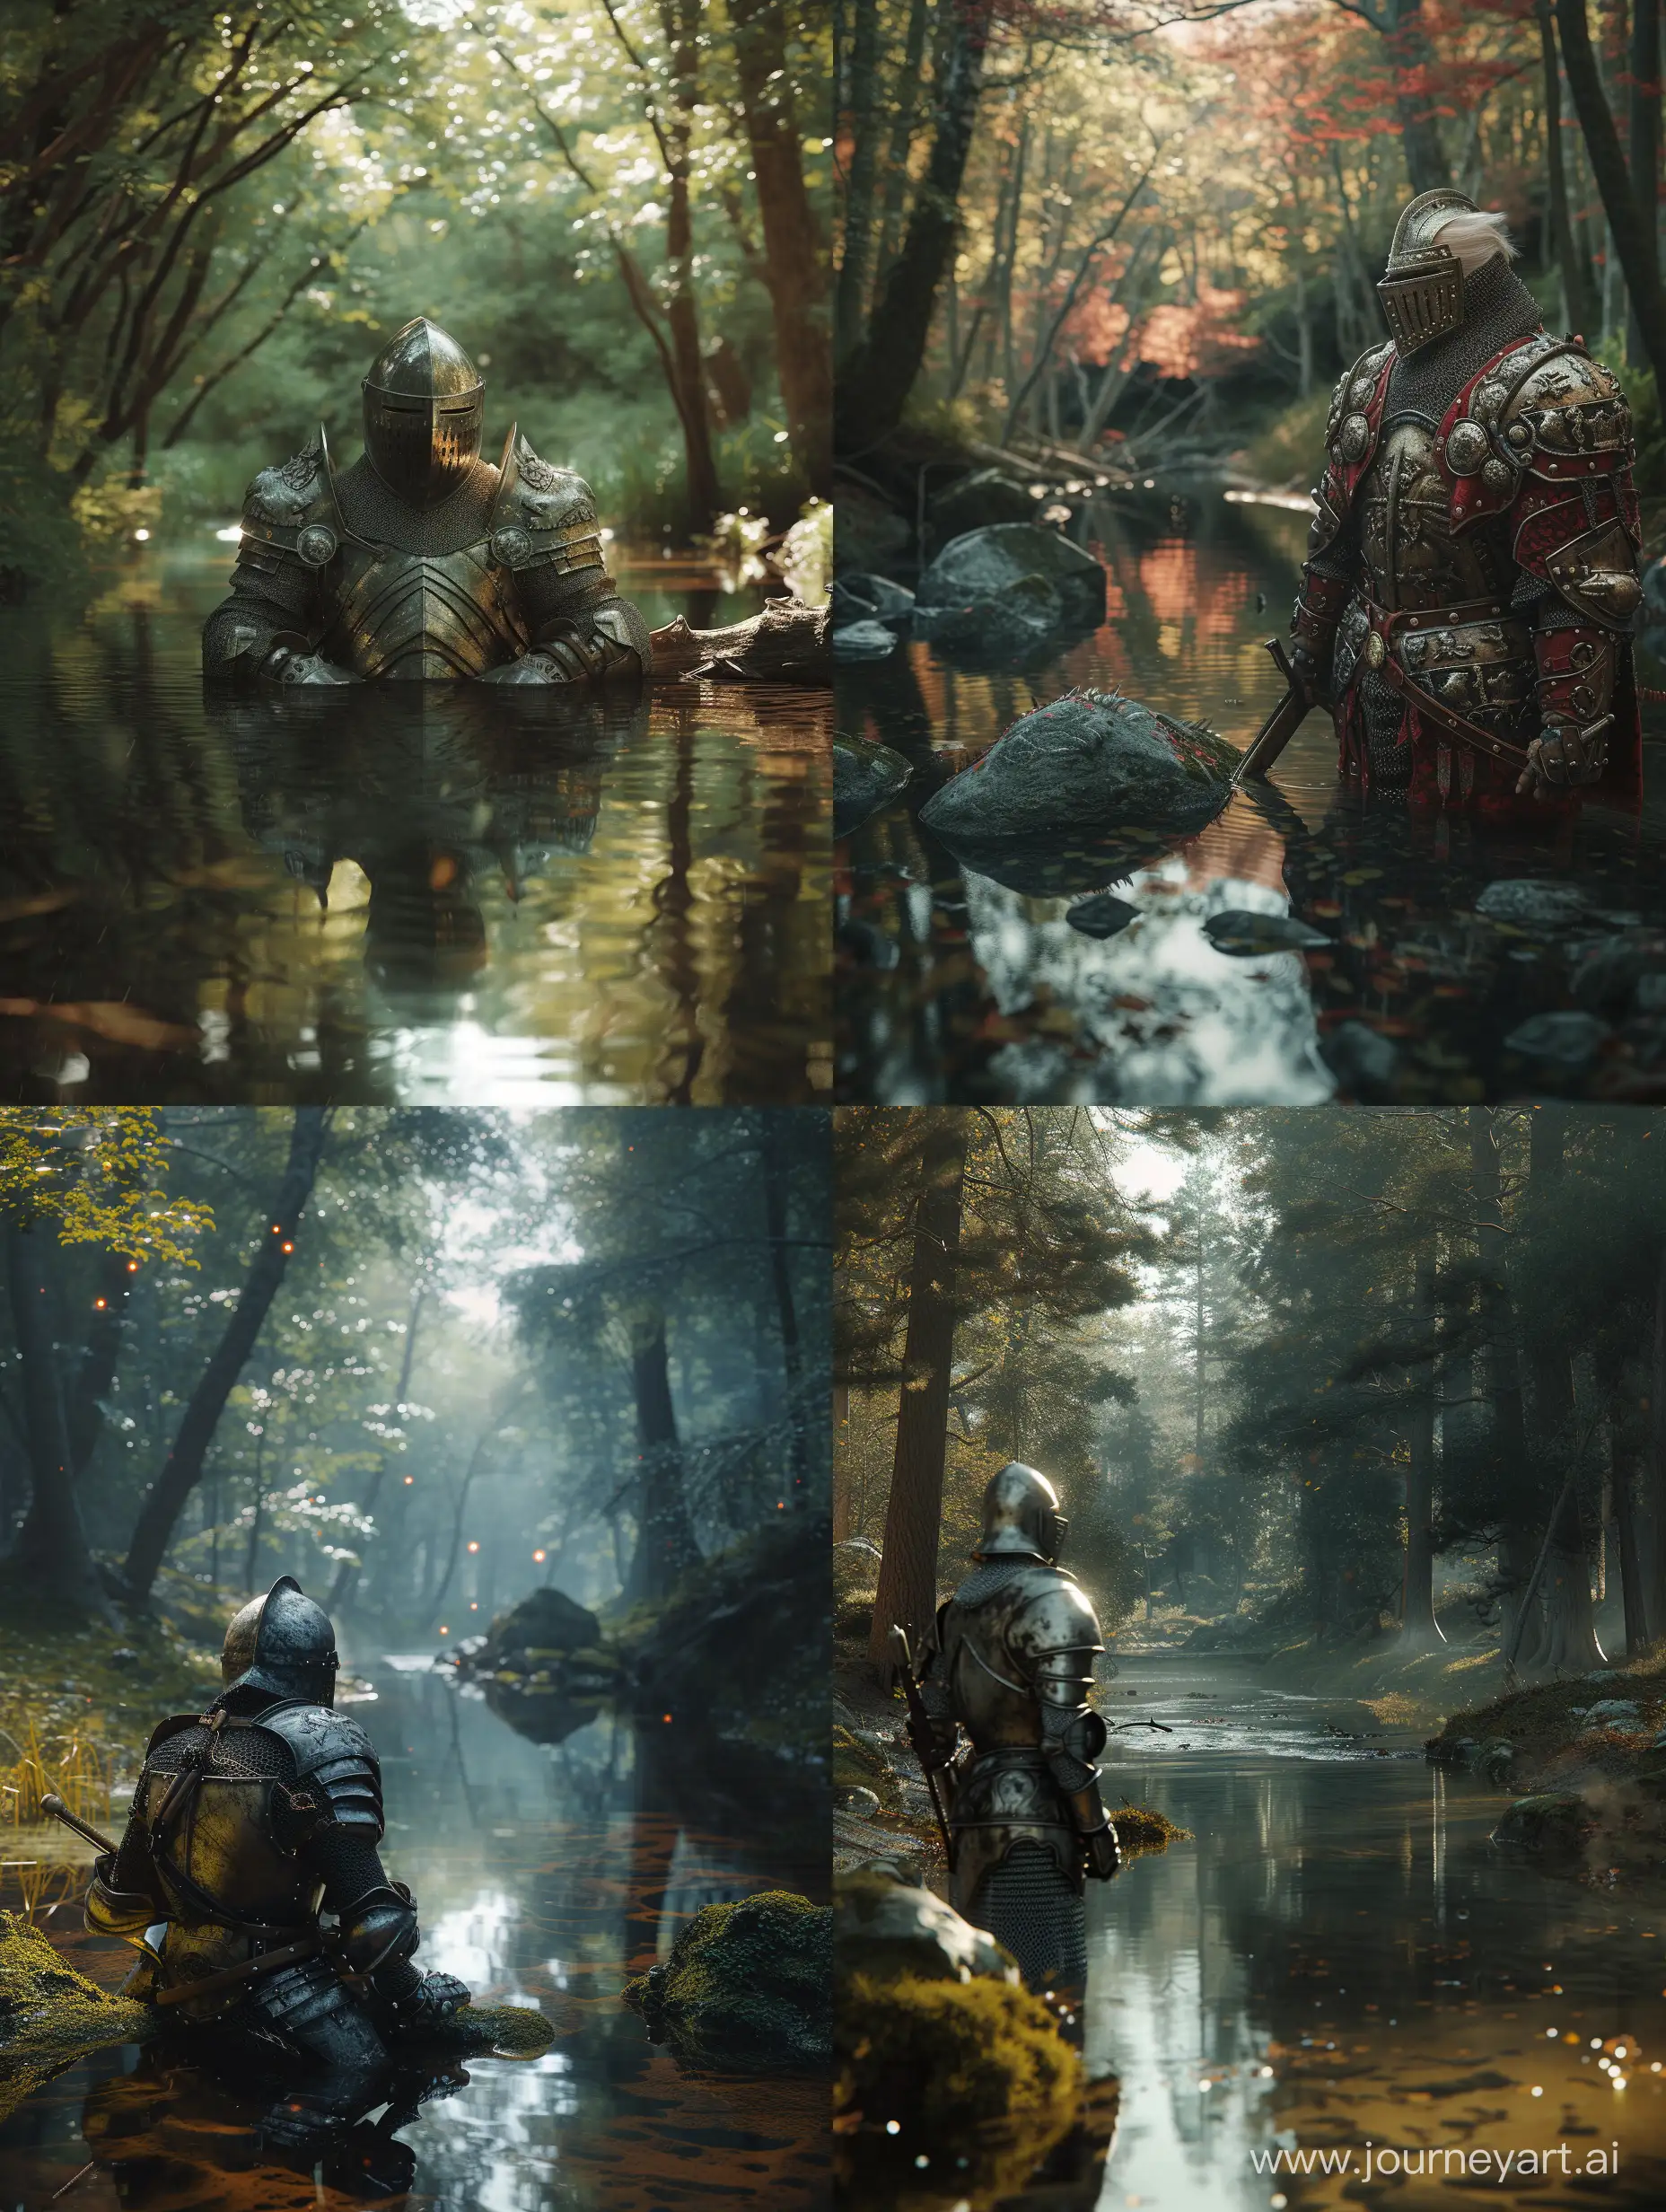 Hyper-Realistic-Trump-in-Medieval-Armor-by-the-River